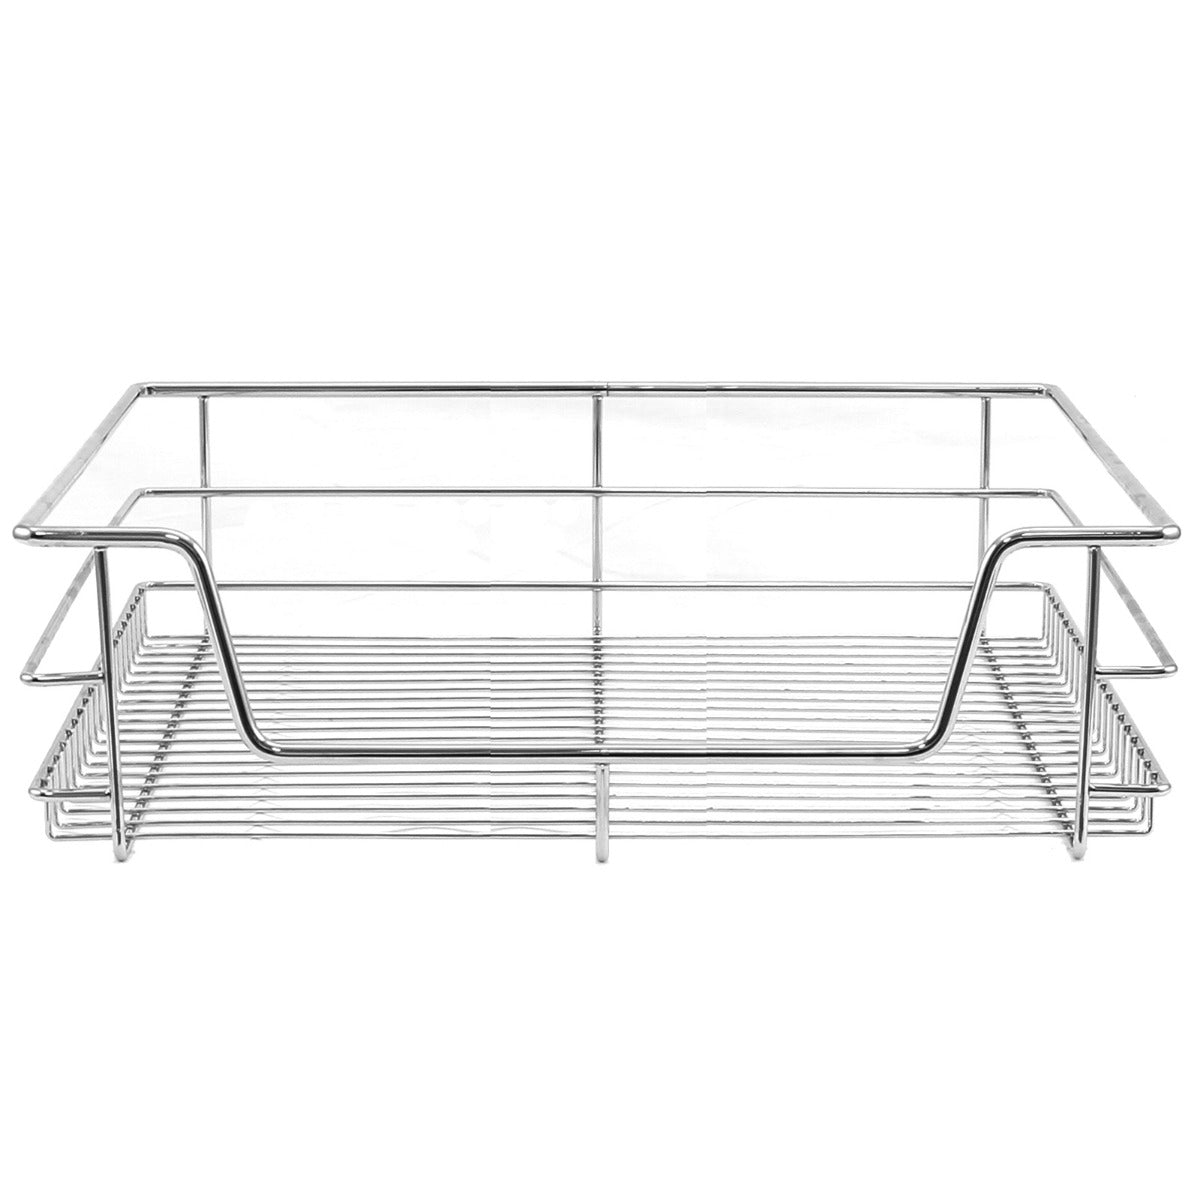 6 x KuKoo Kitchen Pull Out Storage Baskets – 600mm Wide Cabinet